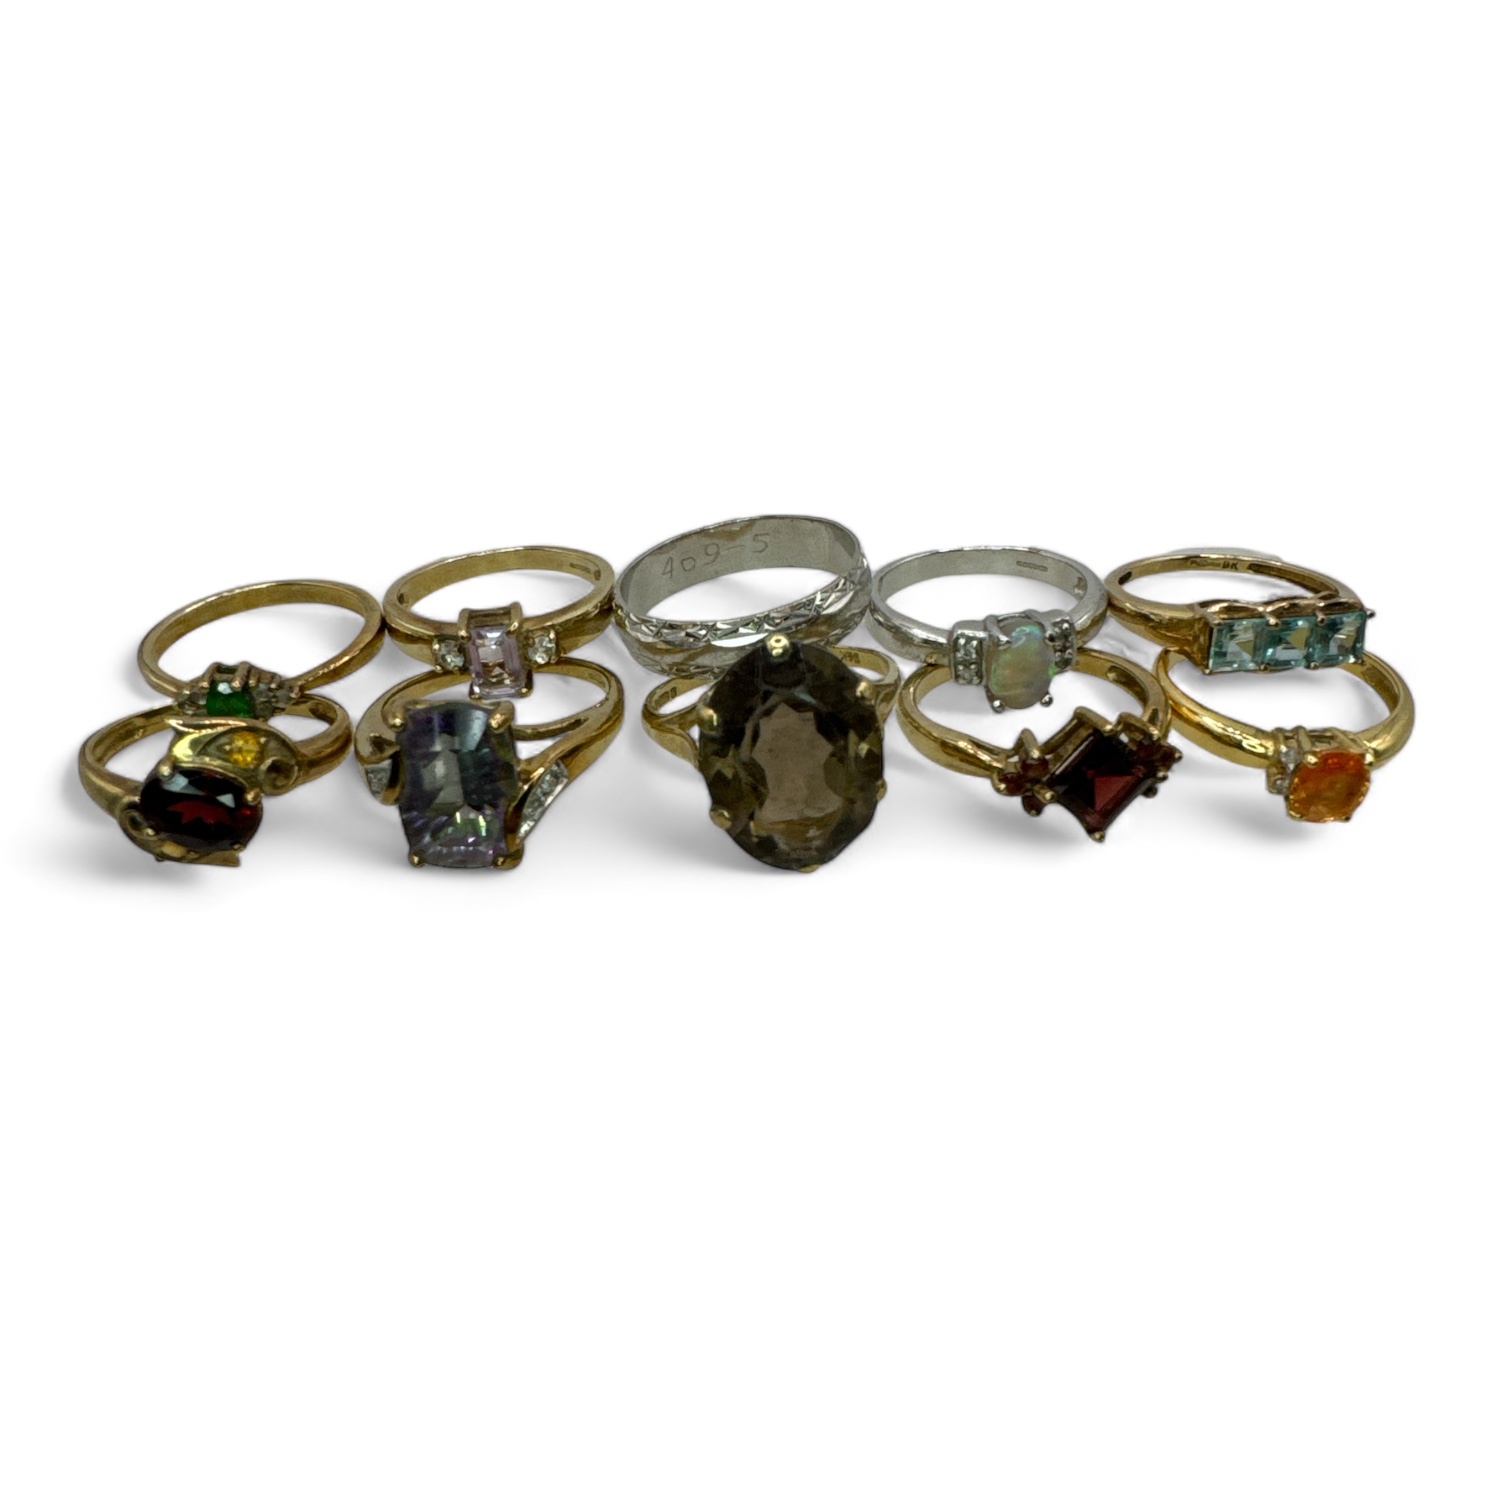 A collection of 9 gem set rings in hallmarked gold, together with a 9ct gold band ring.